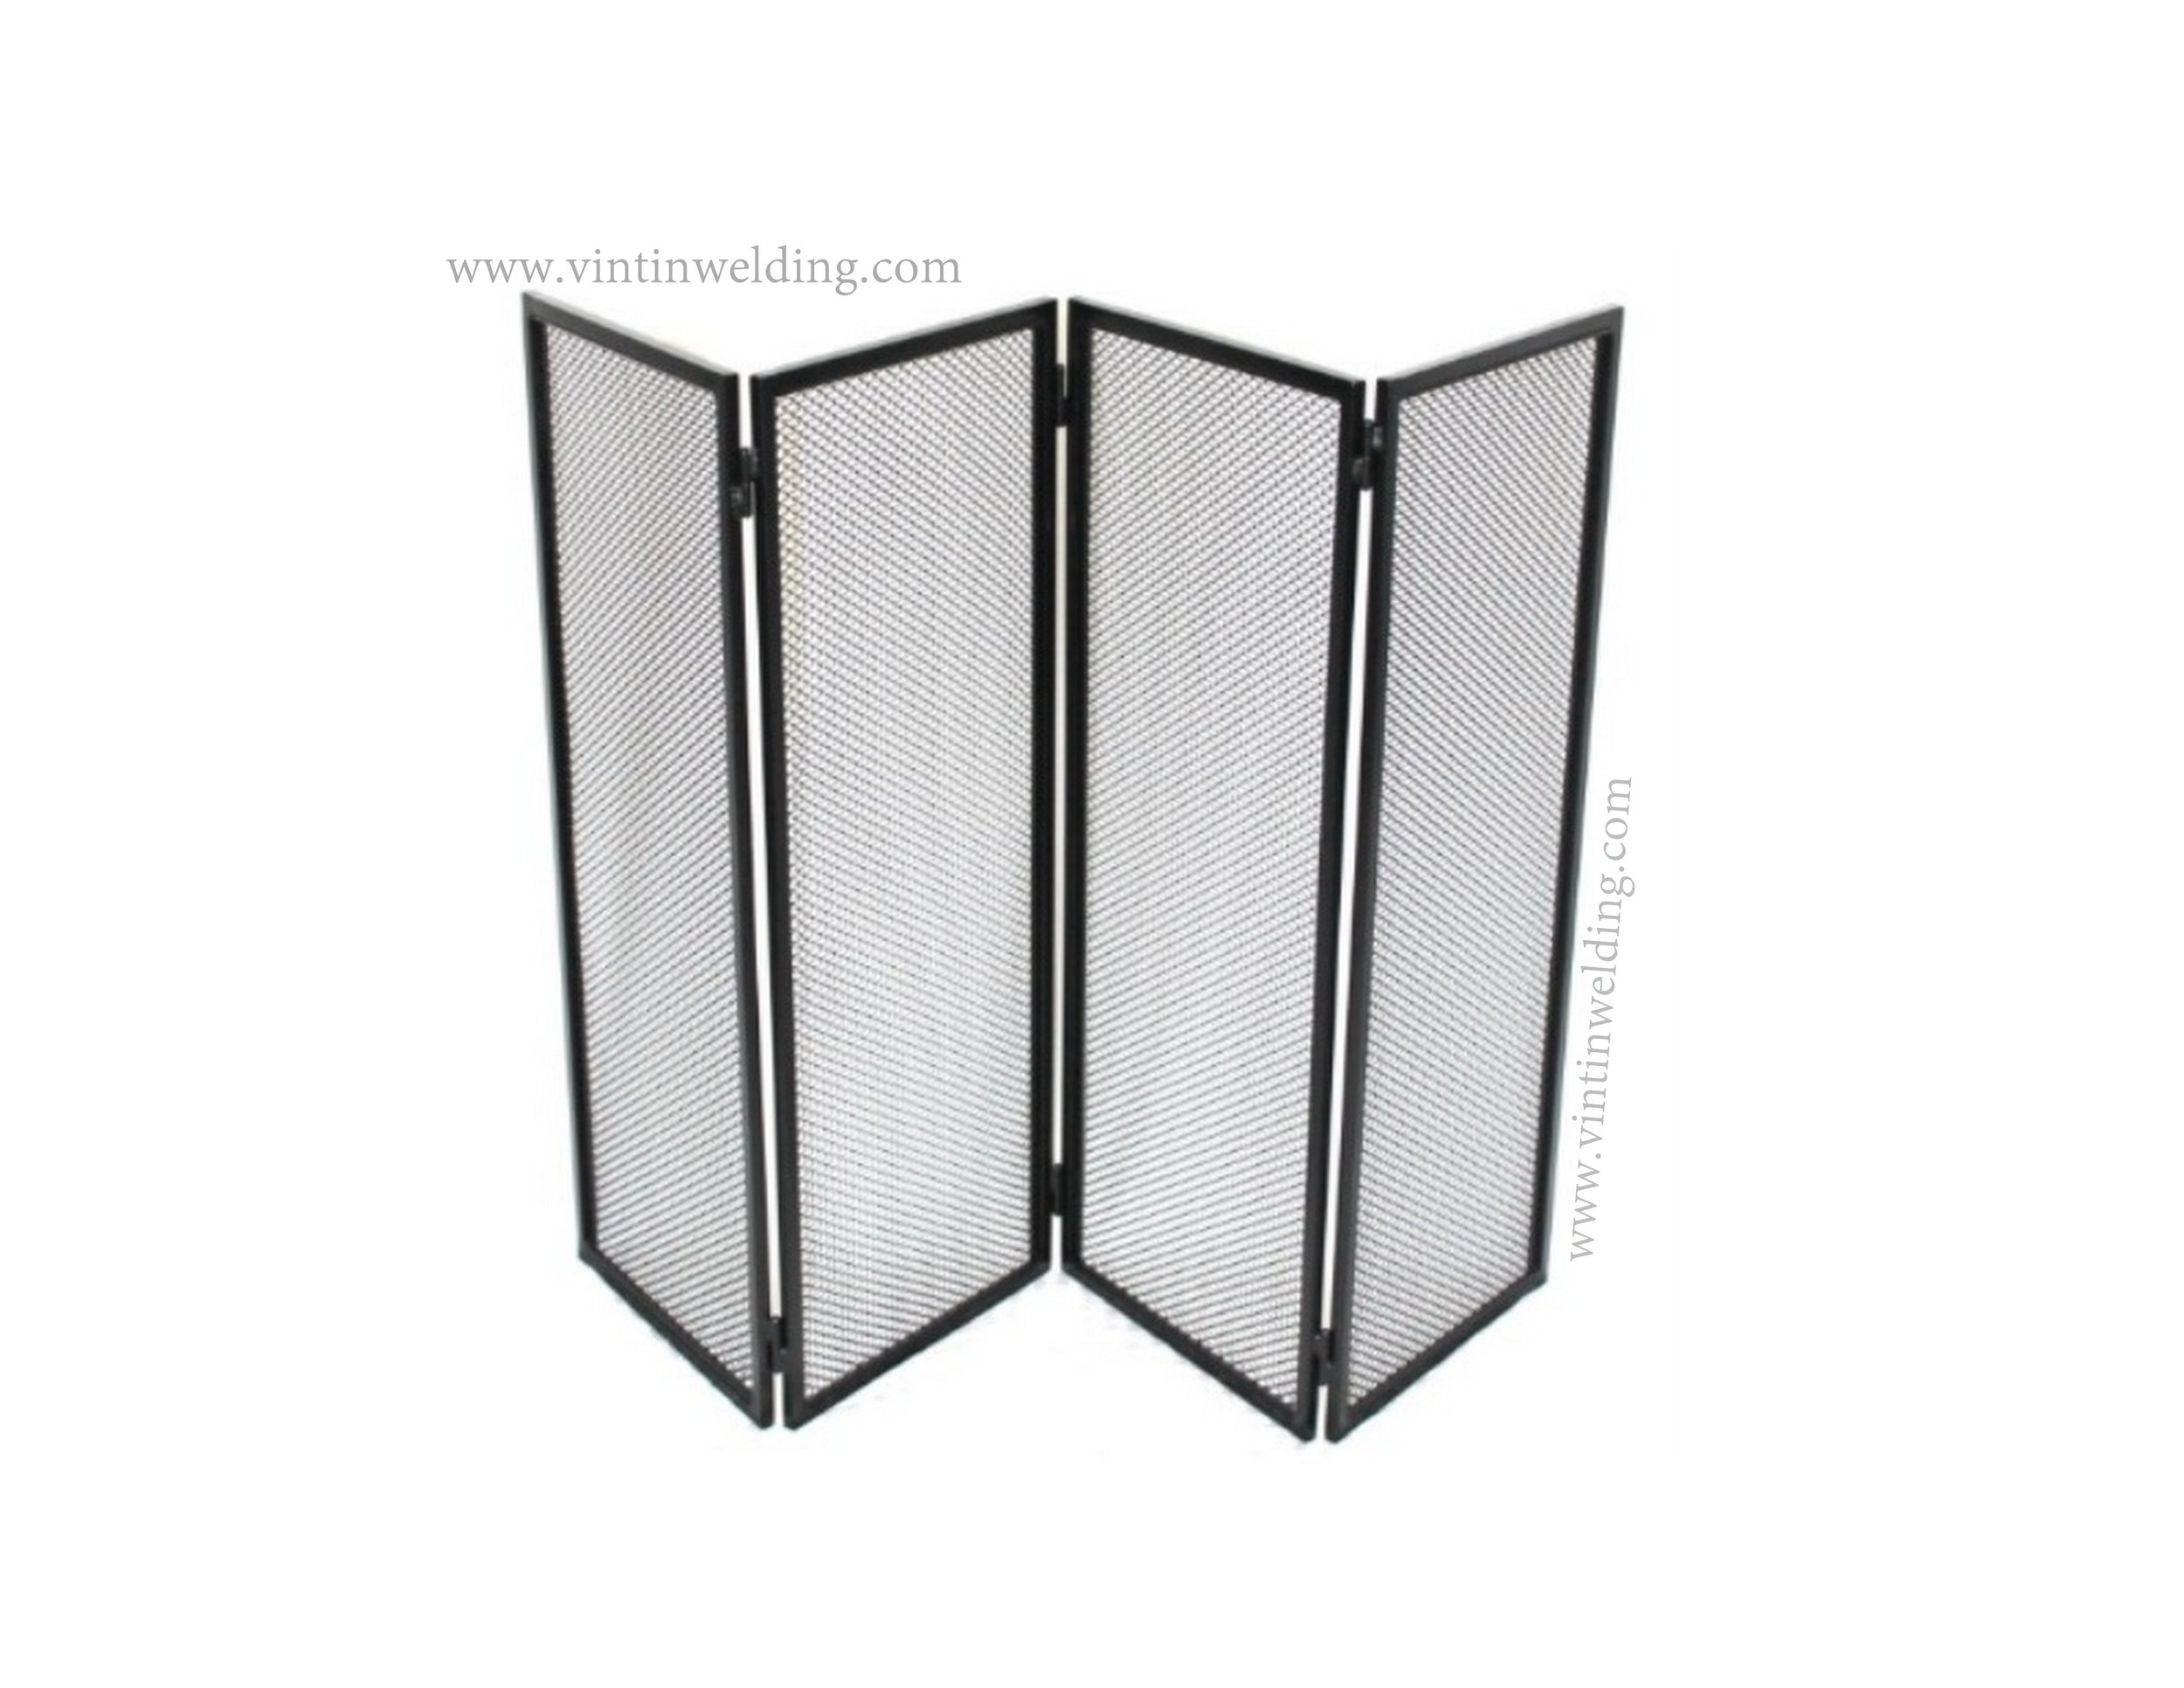 YANJ Fireplace Screen Folding Fireplace Screens with Stainless